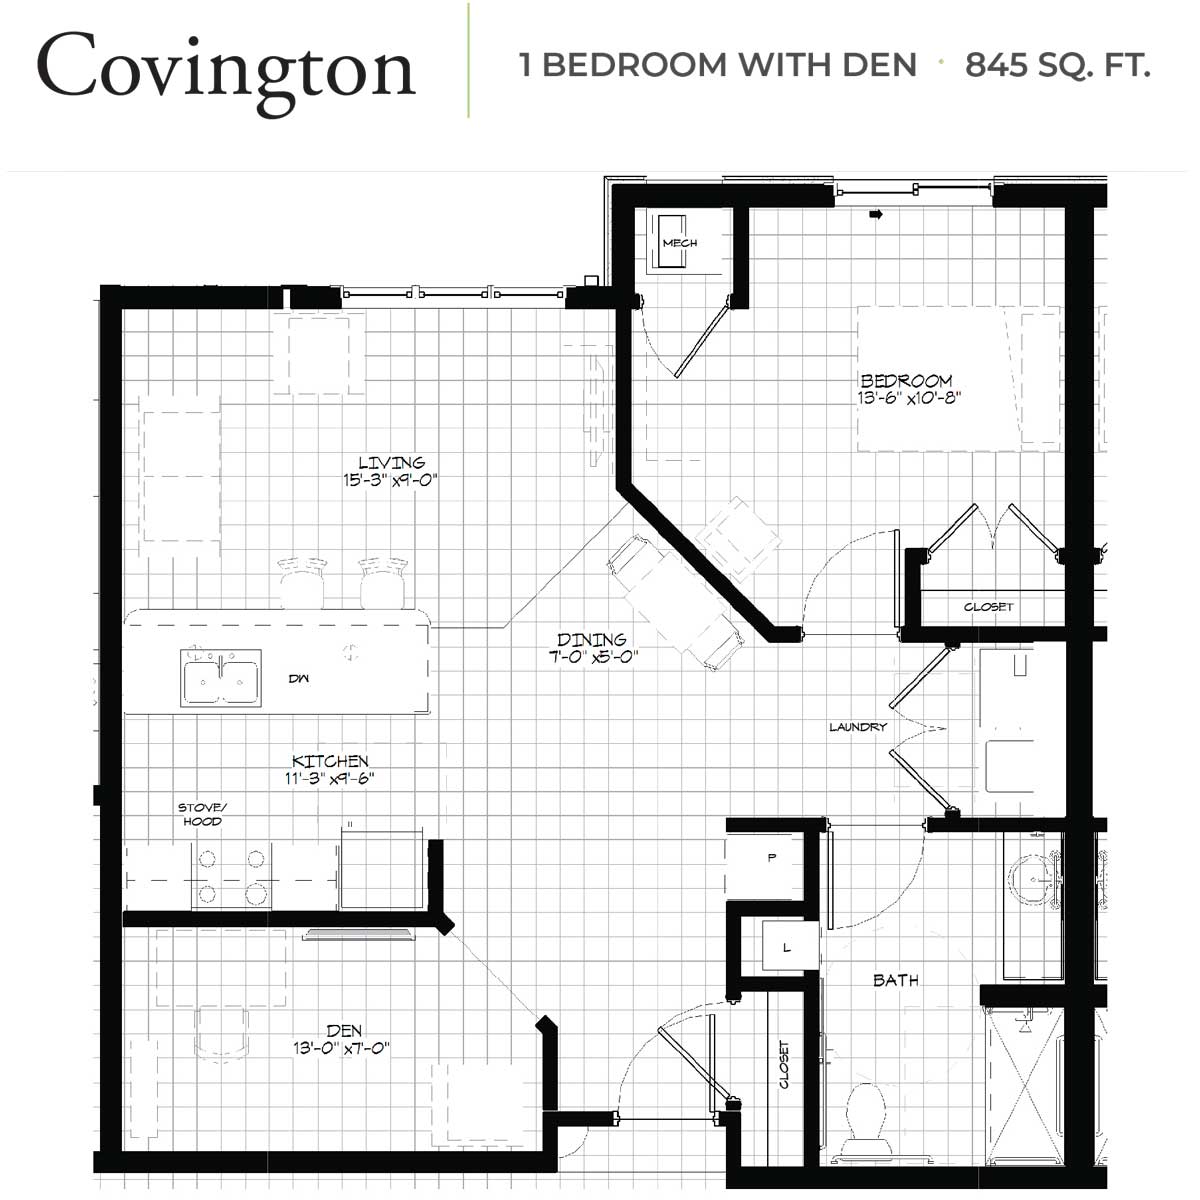 Detailed floor plan of Covington apartment with 1 bedroom, den, kitchen, living and dining areas.